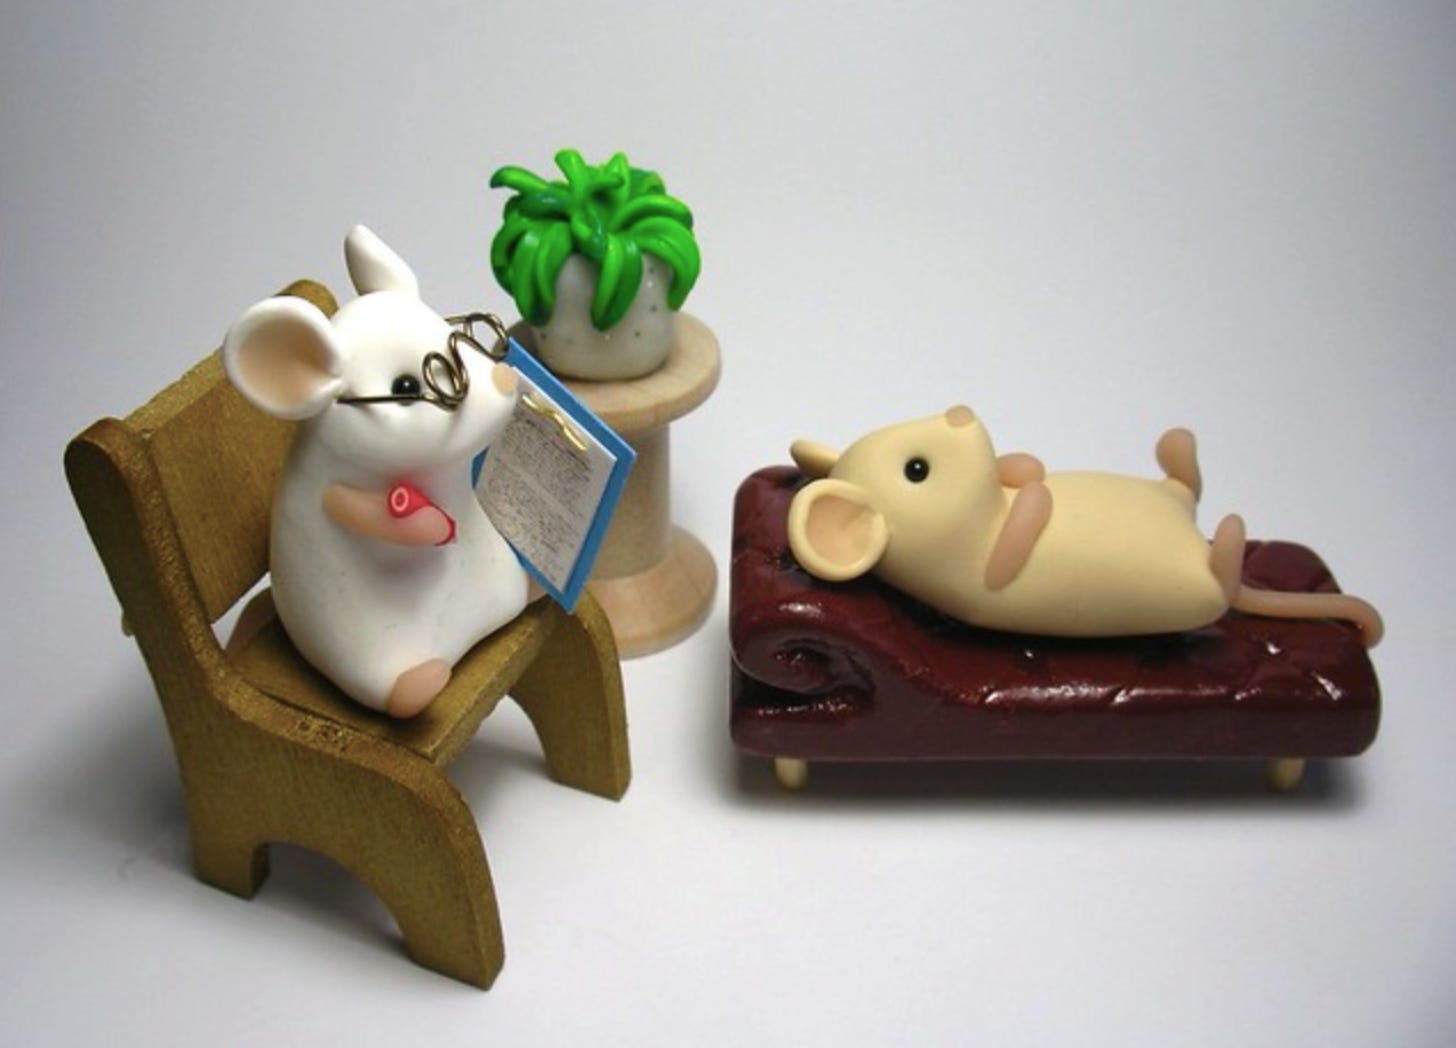 Image of a mouse therapist wearing glasses and holding a notepad and a mouse patient lying on a couch. They are made of clay.